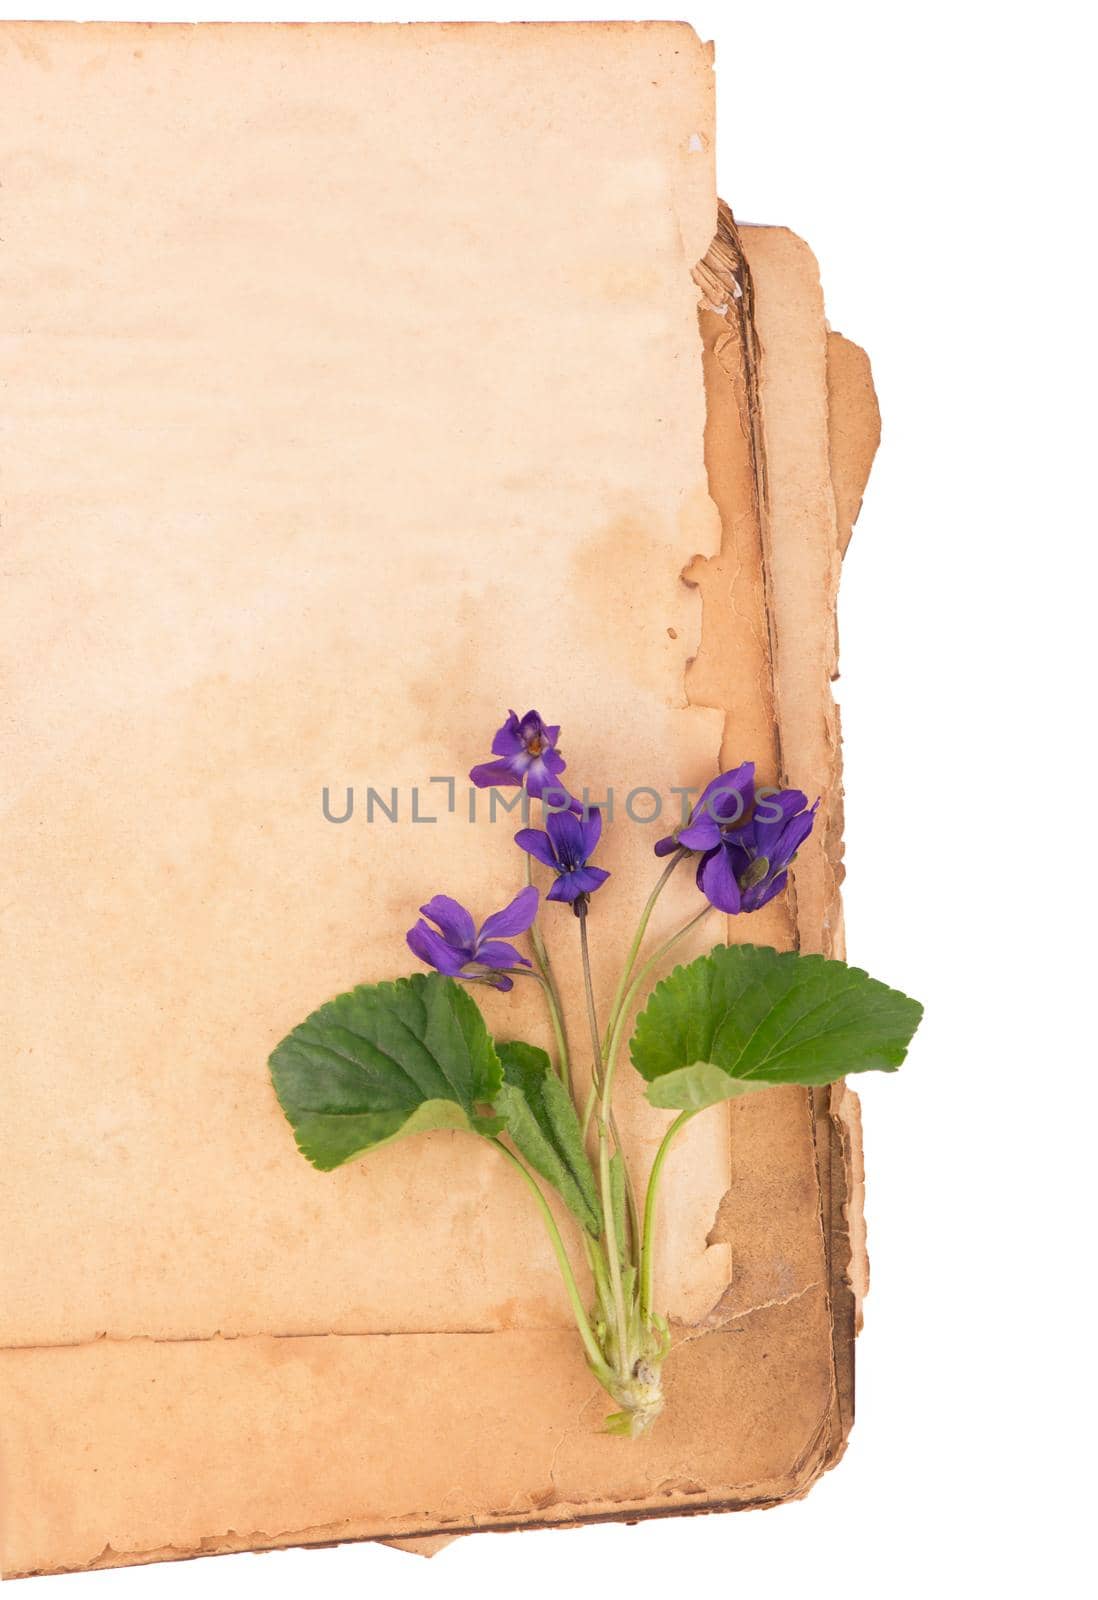 Vintage romantic background with old book, violet flowers